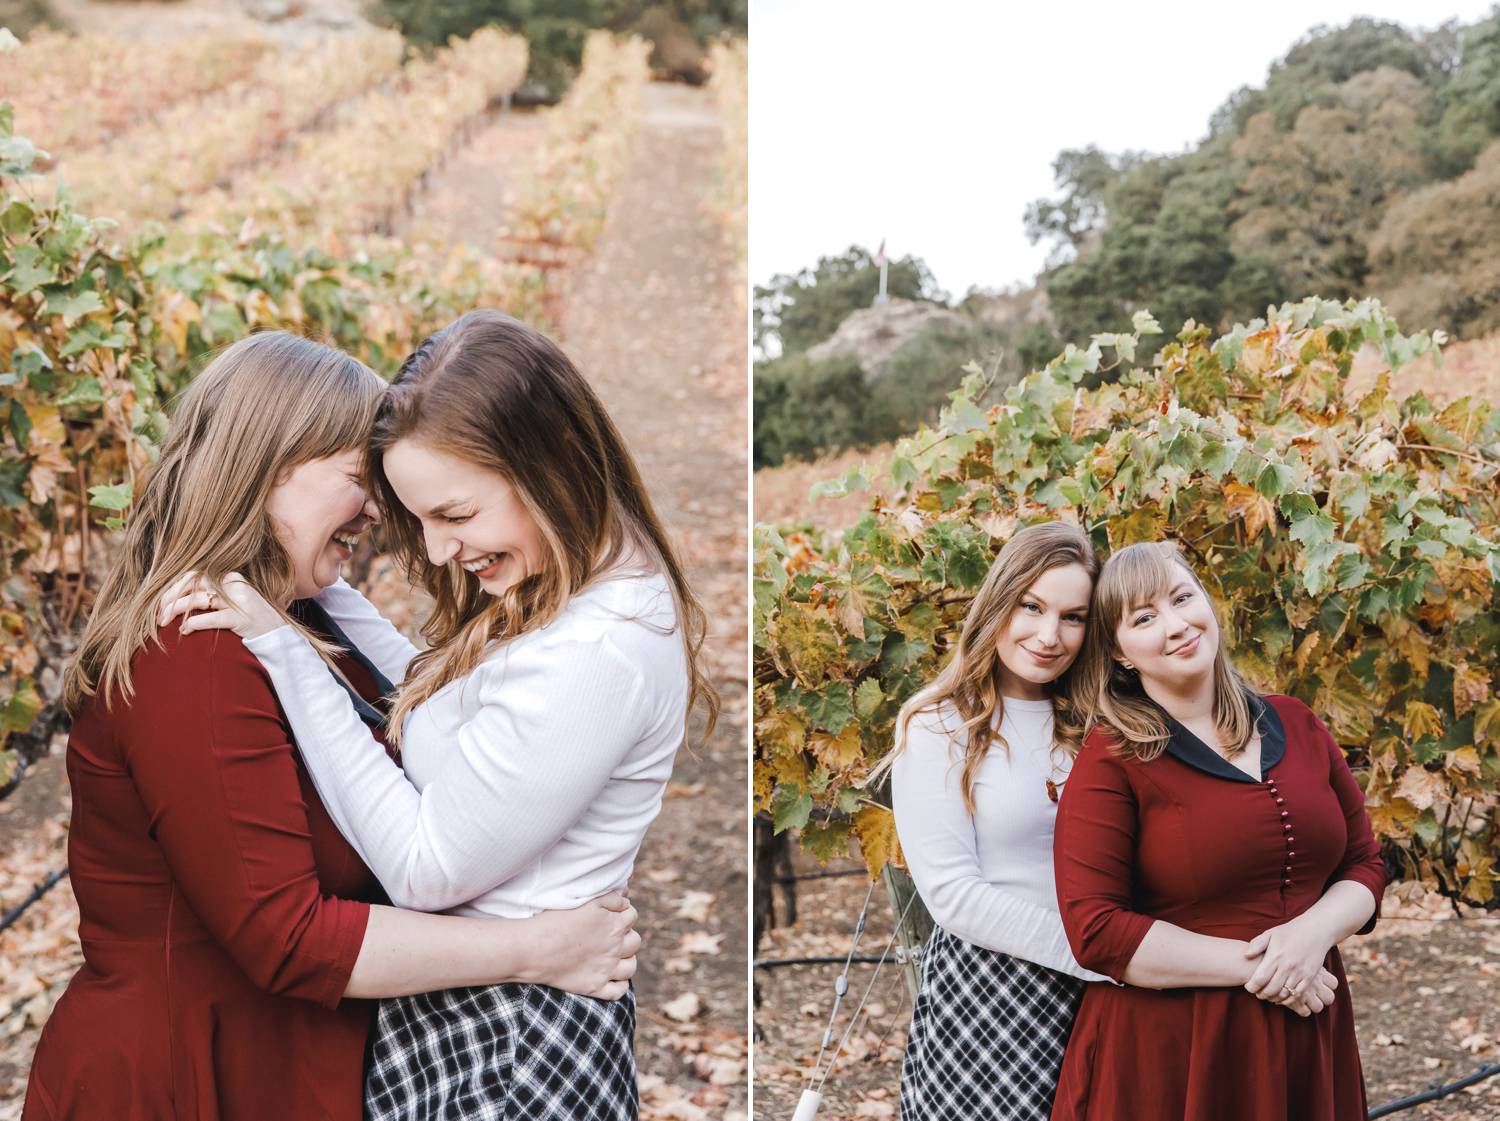 Two engaged woman snuggle lose against the backdrop of a vineyard